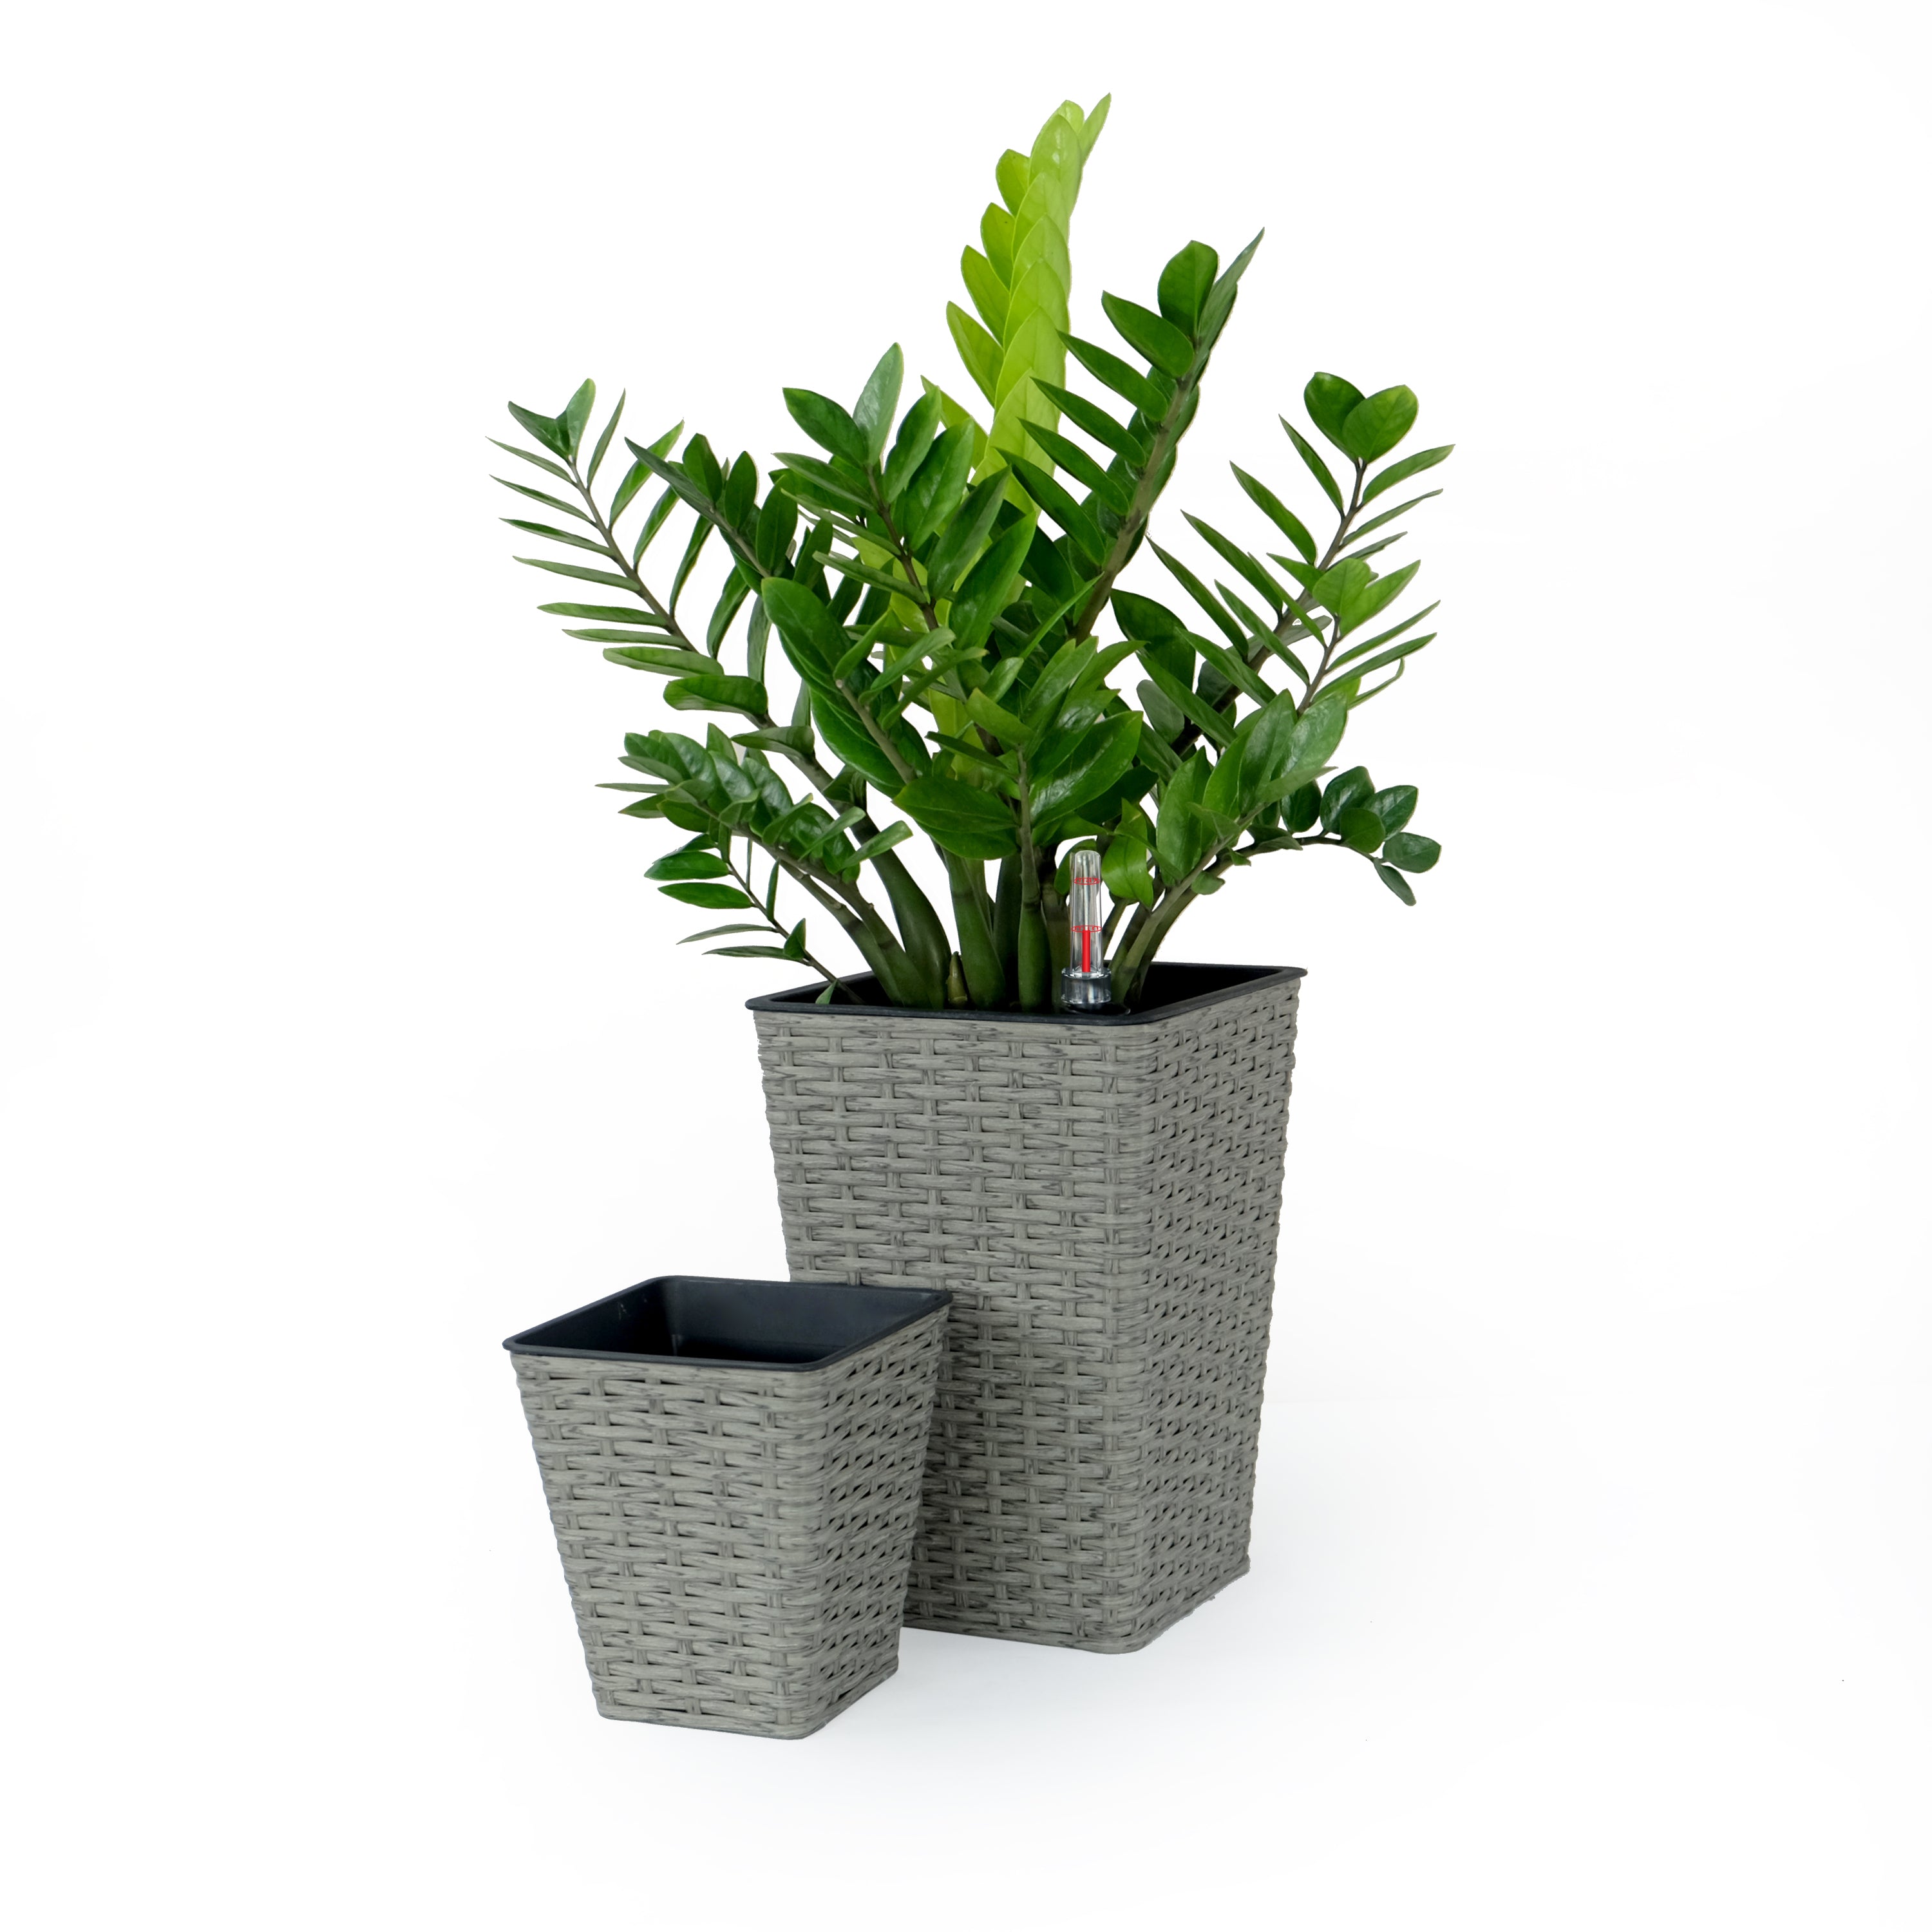 2-Pack-Smart-Self-watering-Square-Planter-for-Indoor-and-Outdoor-Hand-Woven-Wicker-Gray-Pots-&-Planters